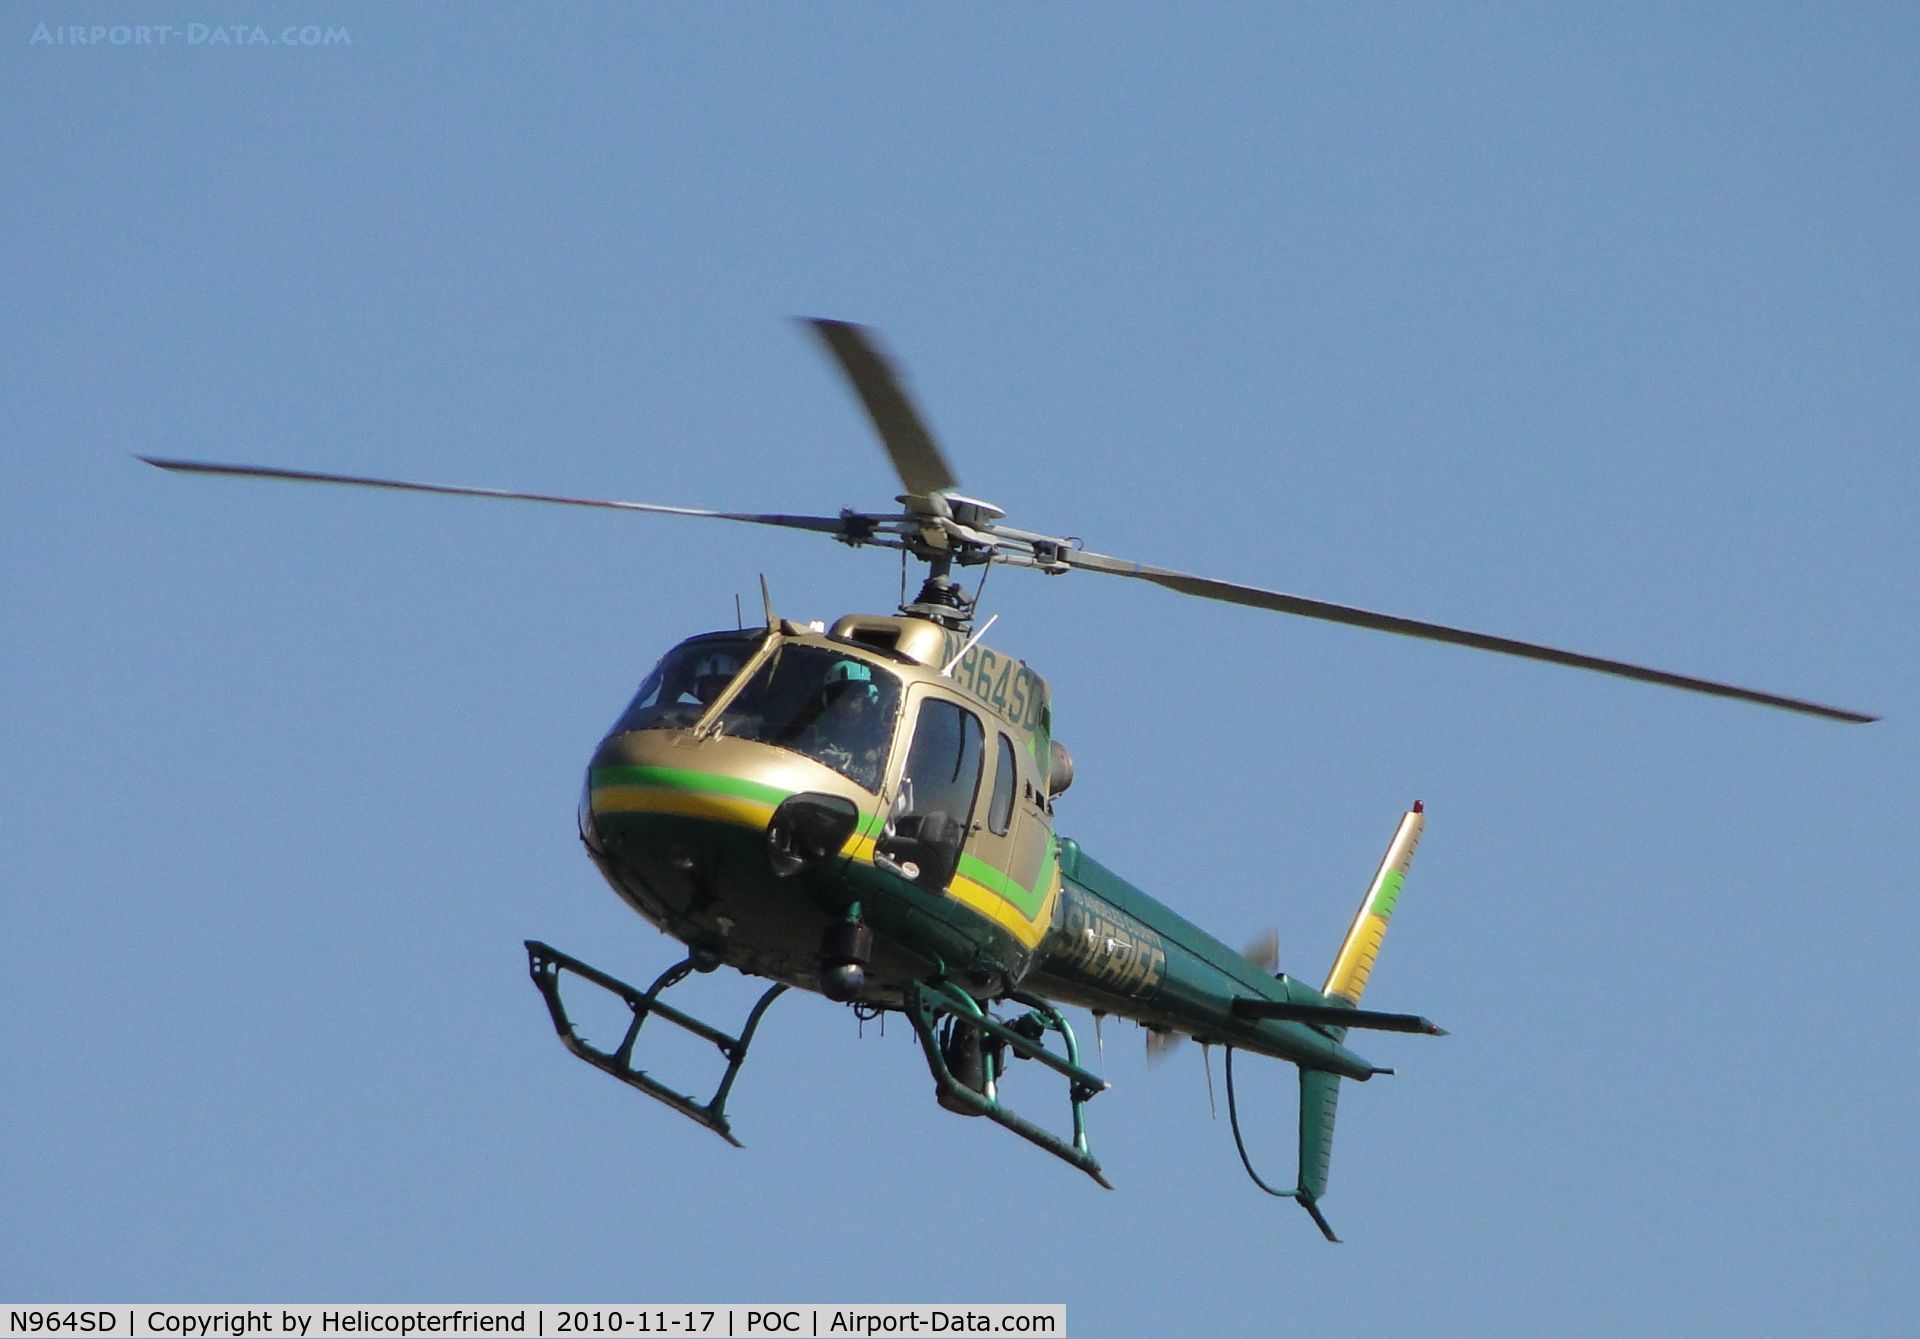 N964SD, Eurocopter AS-350B-2 Ecureuil Ecureuil C/N 3529, On final over taxiway Sierra heading to helipad